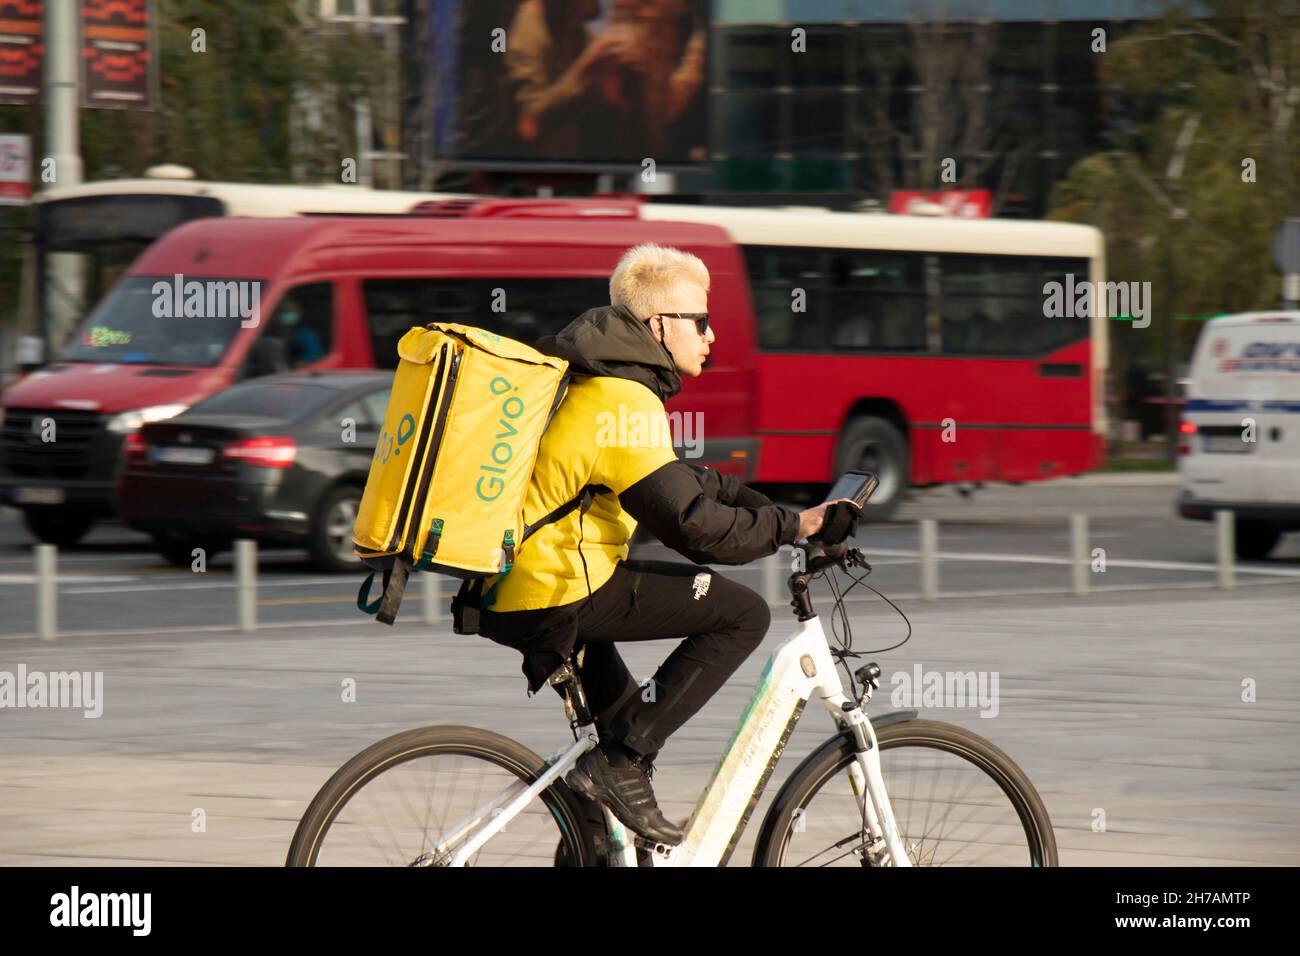 Belgrade, Serbia - November 17, 2021: Young man working for Glovo city food delivery service riding a bike across the town square Stock Photo